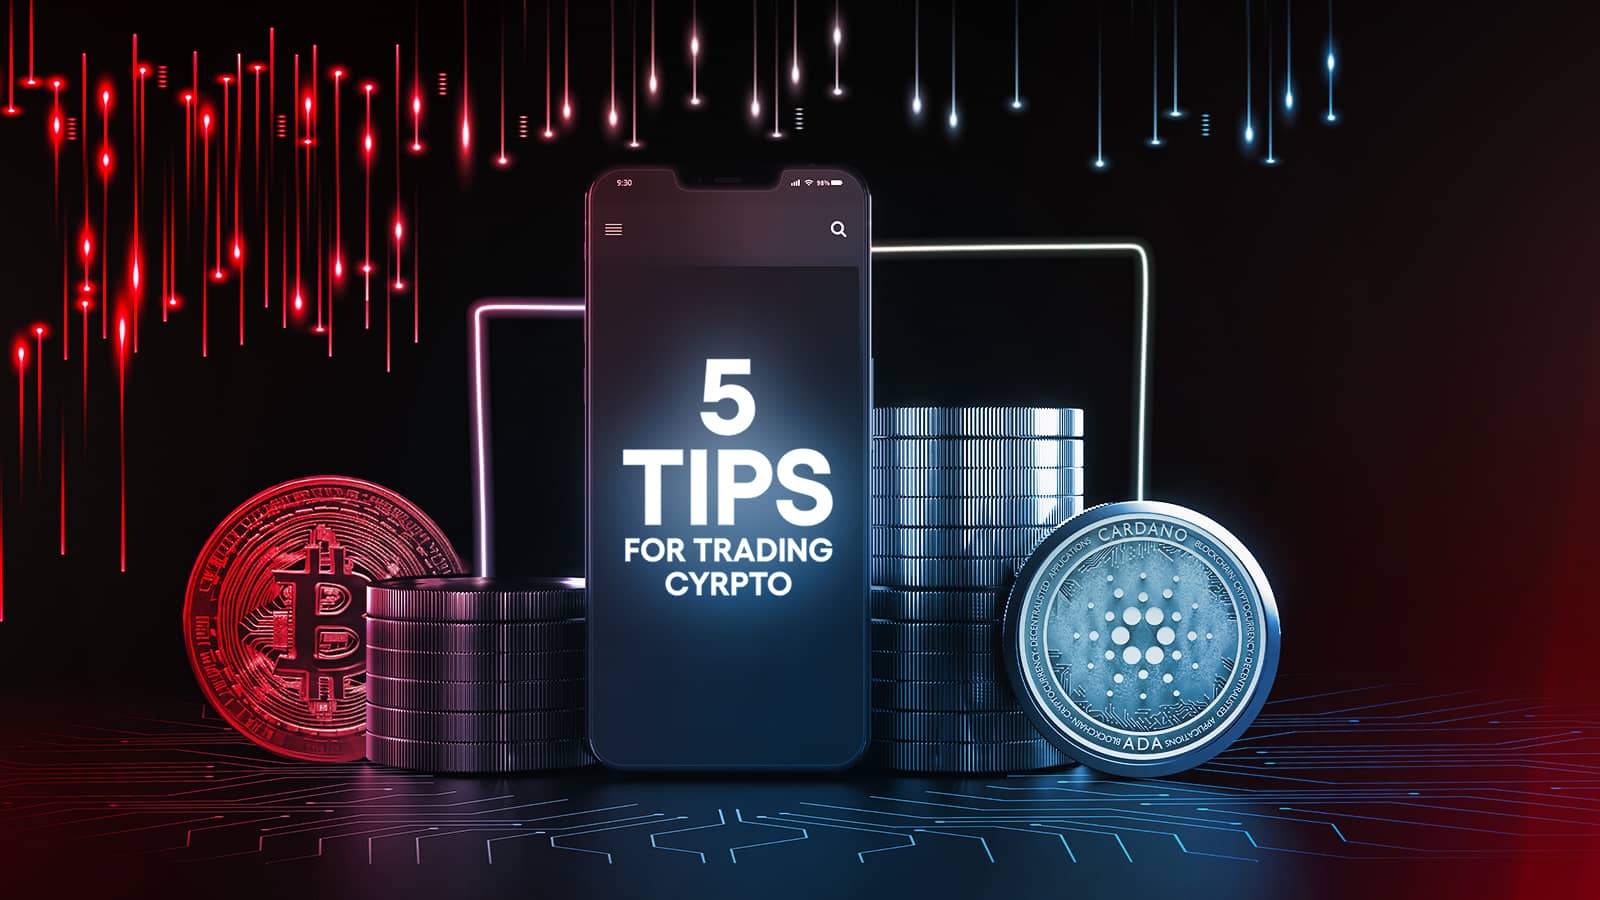 5 Tips for Trading Crypto title with crypto coins in the background